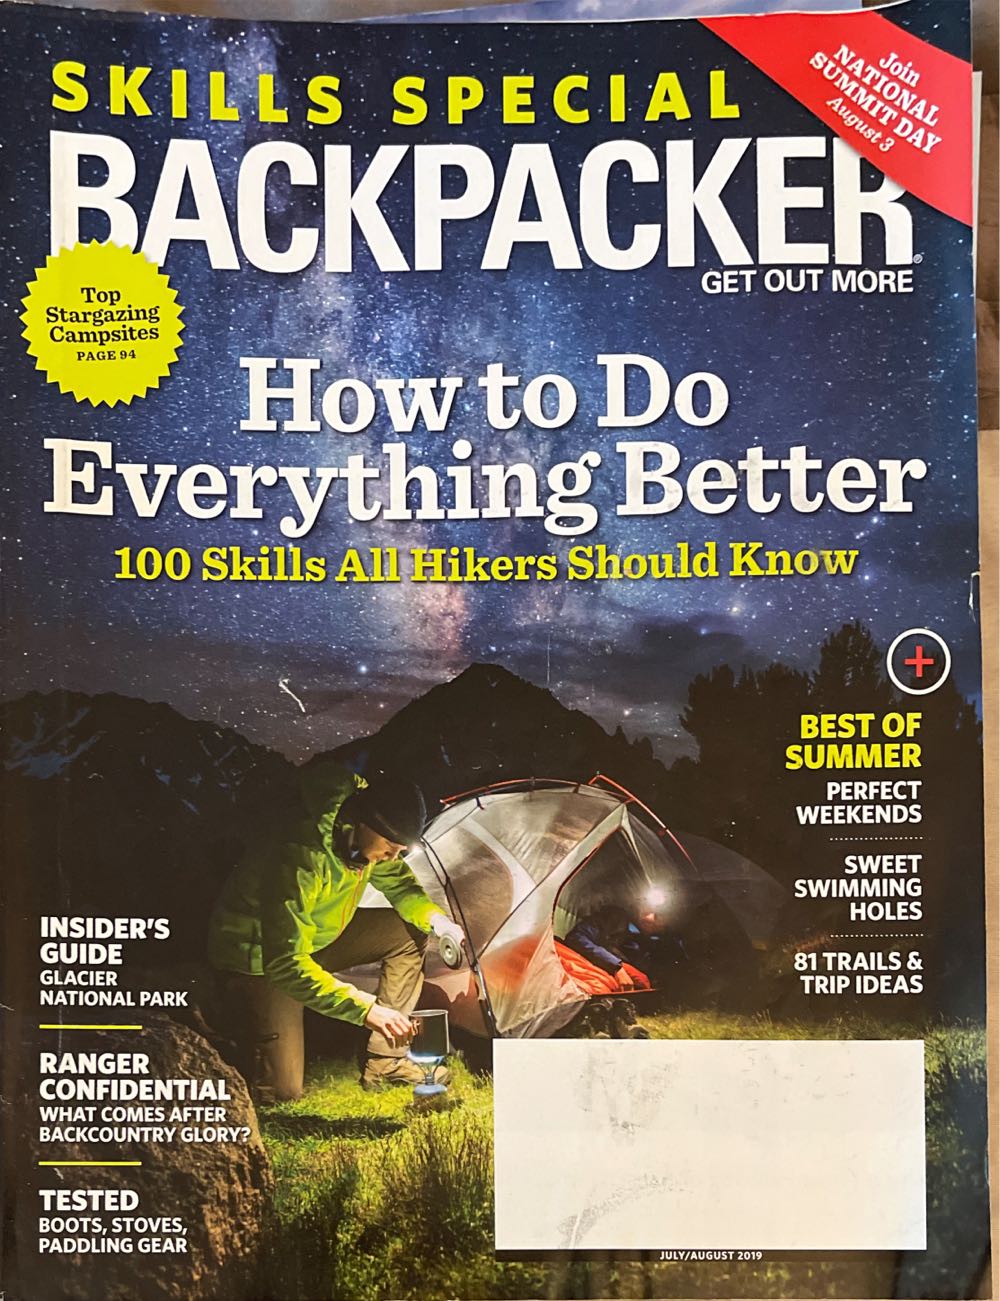 Backpacker : Skills Special  magazine collectible - Main Image 1